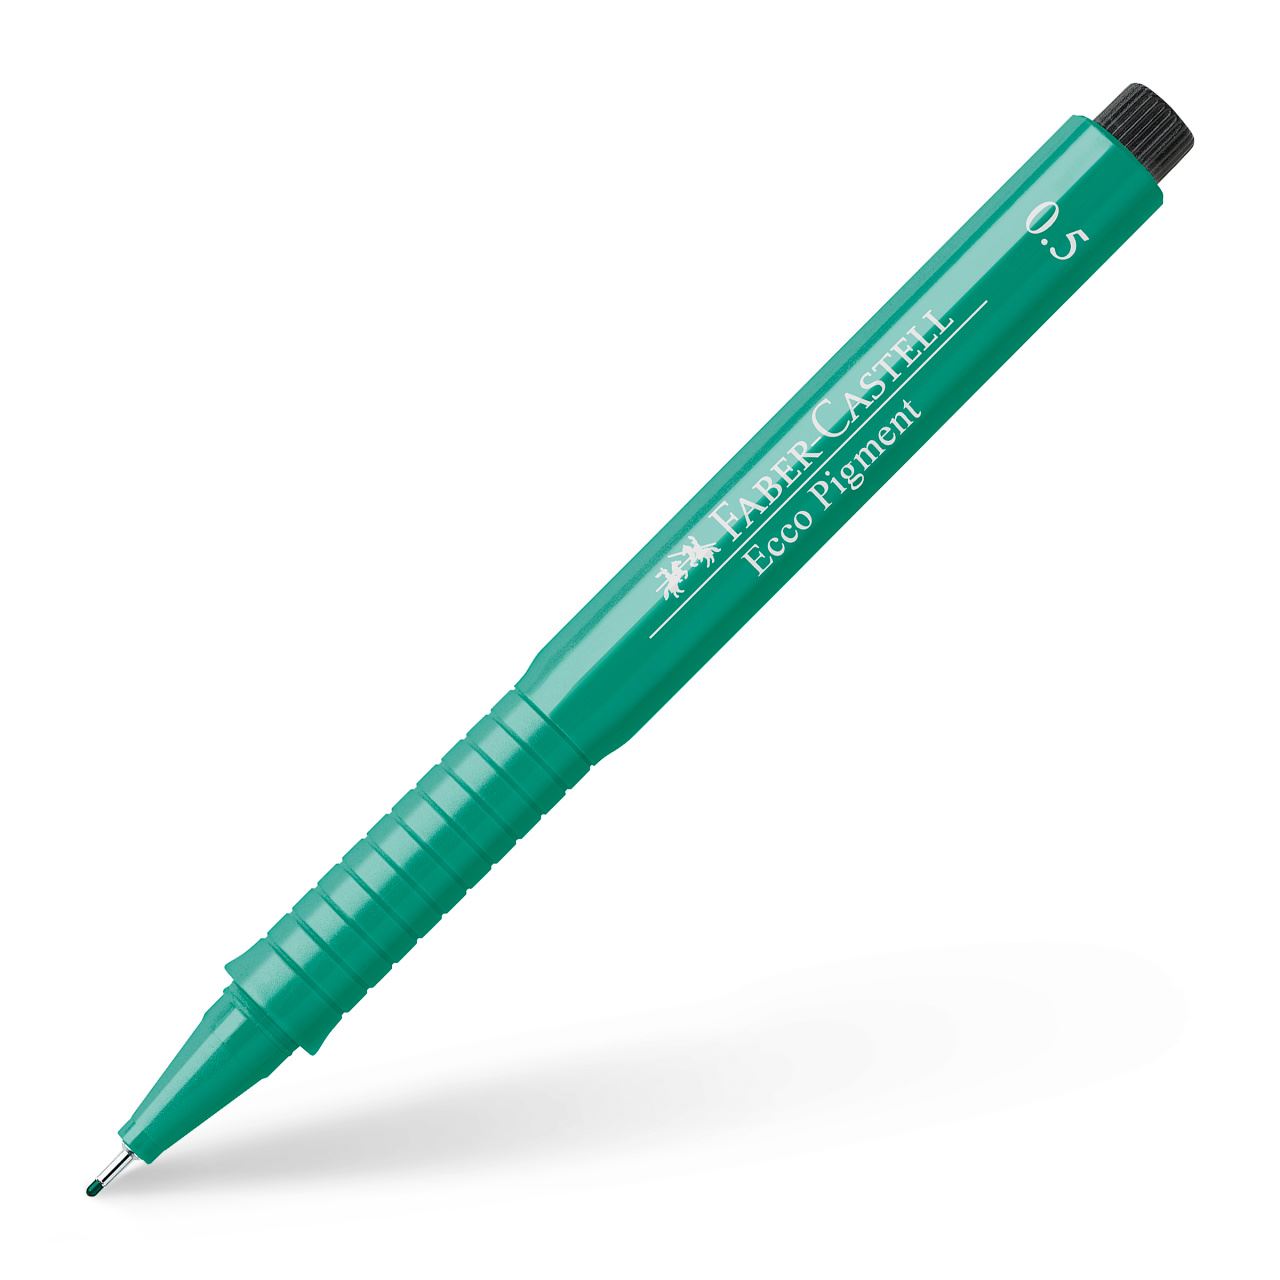 Faber-Castell - Ecco Pigment Fineliner, 0.5 mm, green